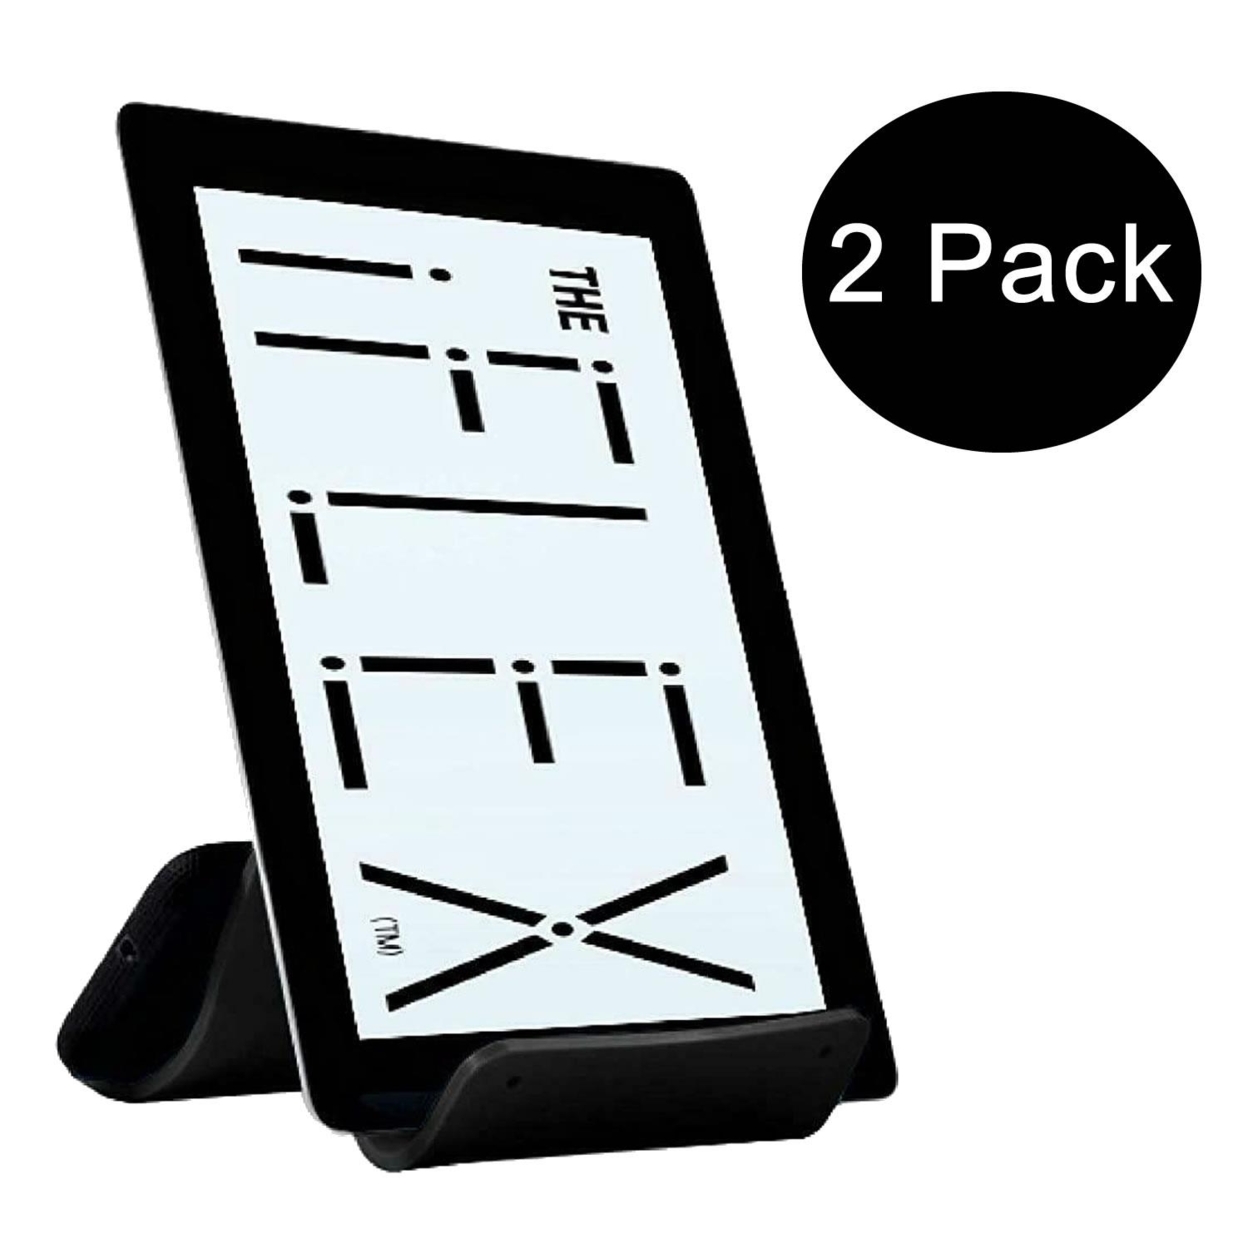 IFLEX Tablet Cell Phone Stand Black 2-Pack Universal Non-Slip Waterproof Hands-Free